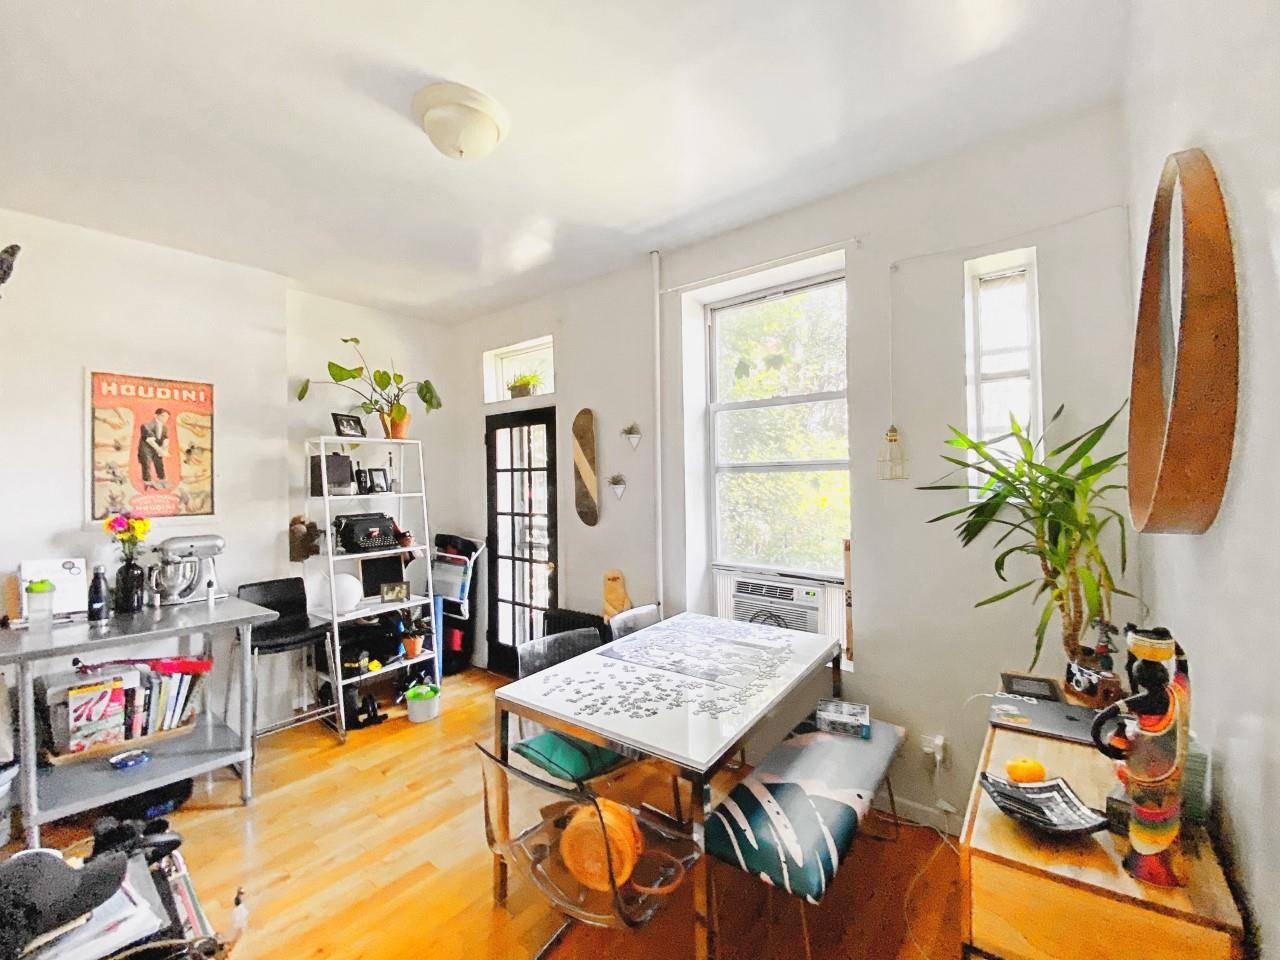 A rare find, Gorgeous One bedroom Duplex with additional room and a beautiful private garden backyard plus laundry in building.